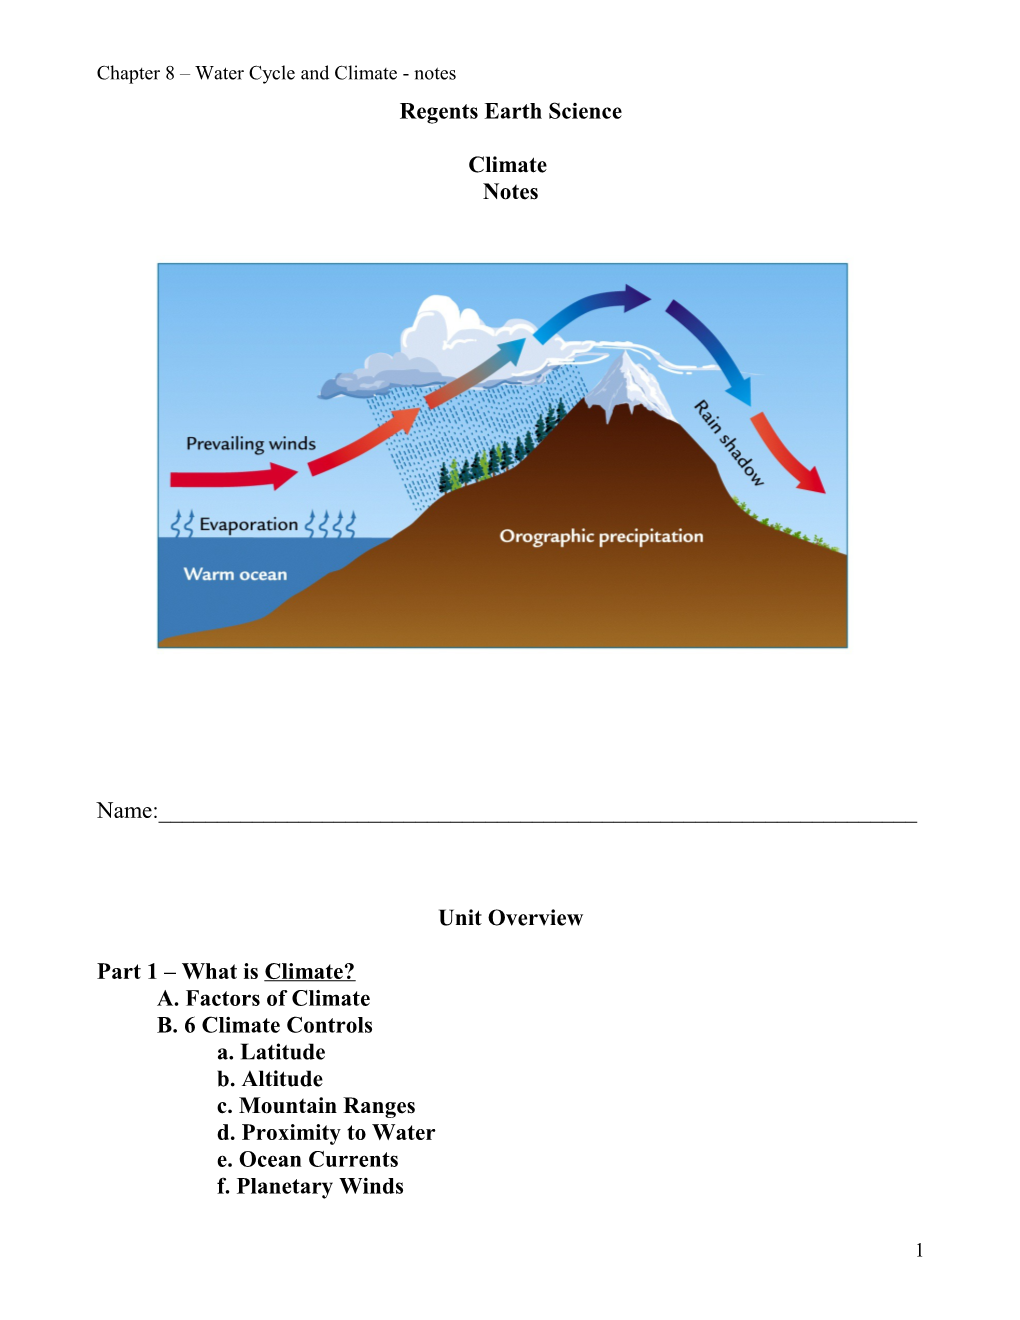 Chapter 8 Water Cycle and Climate - Notes